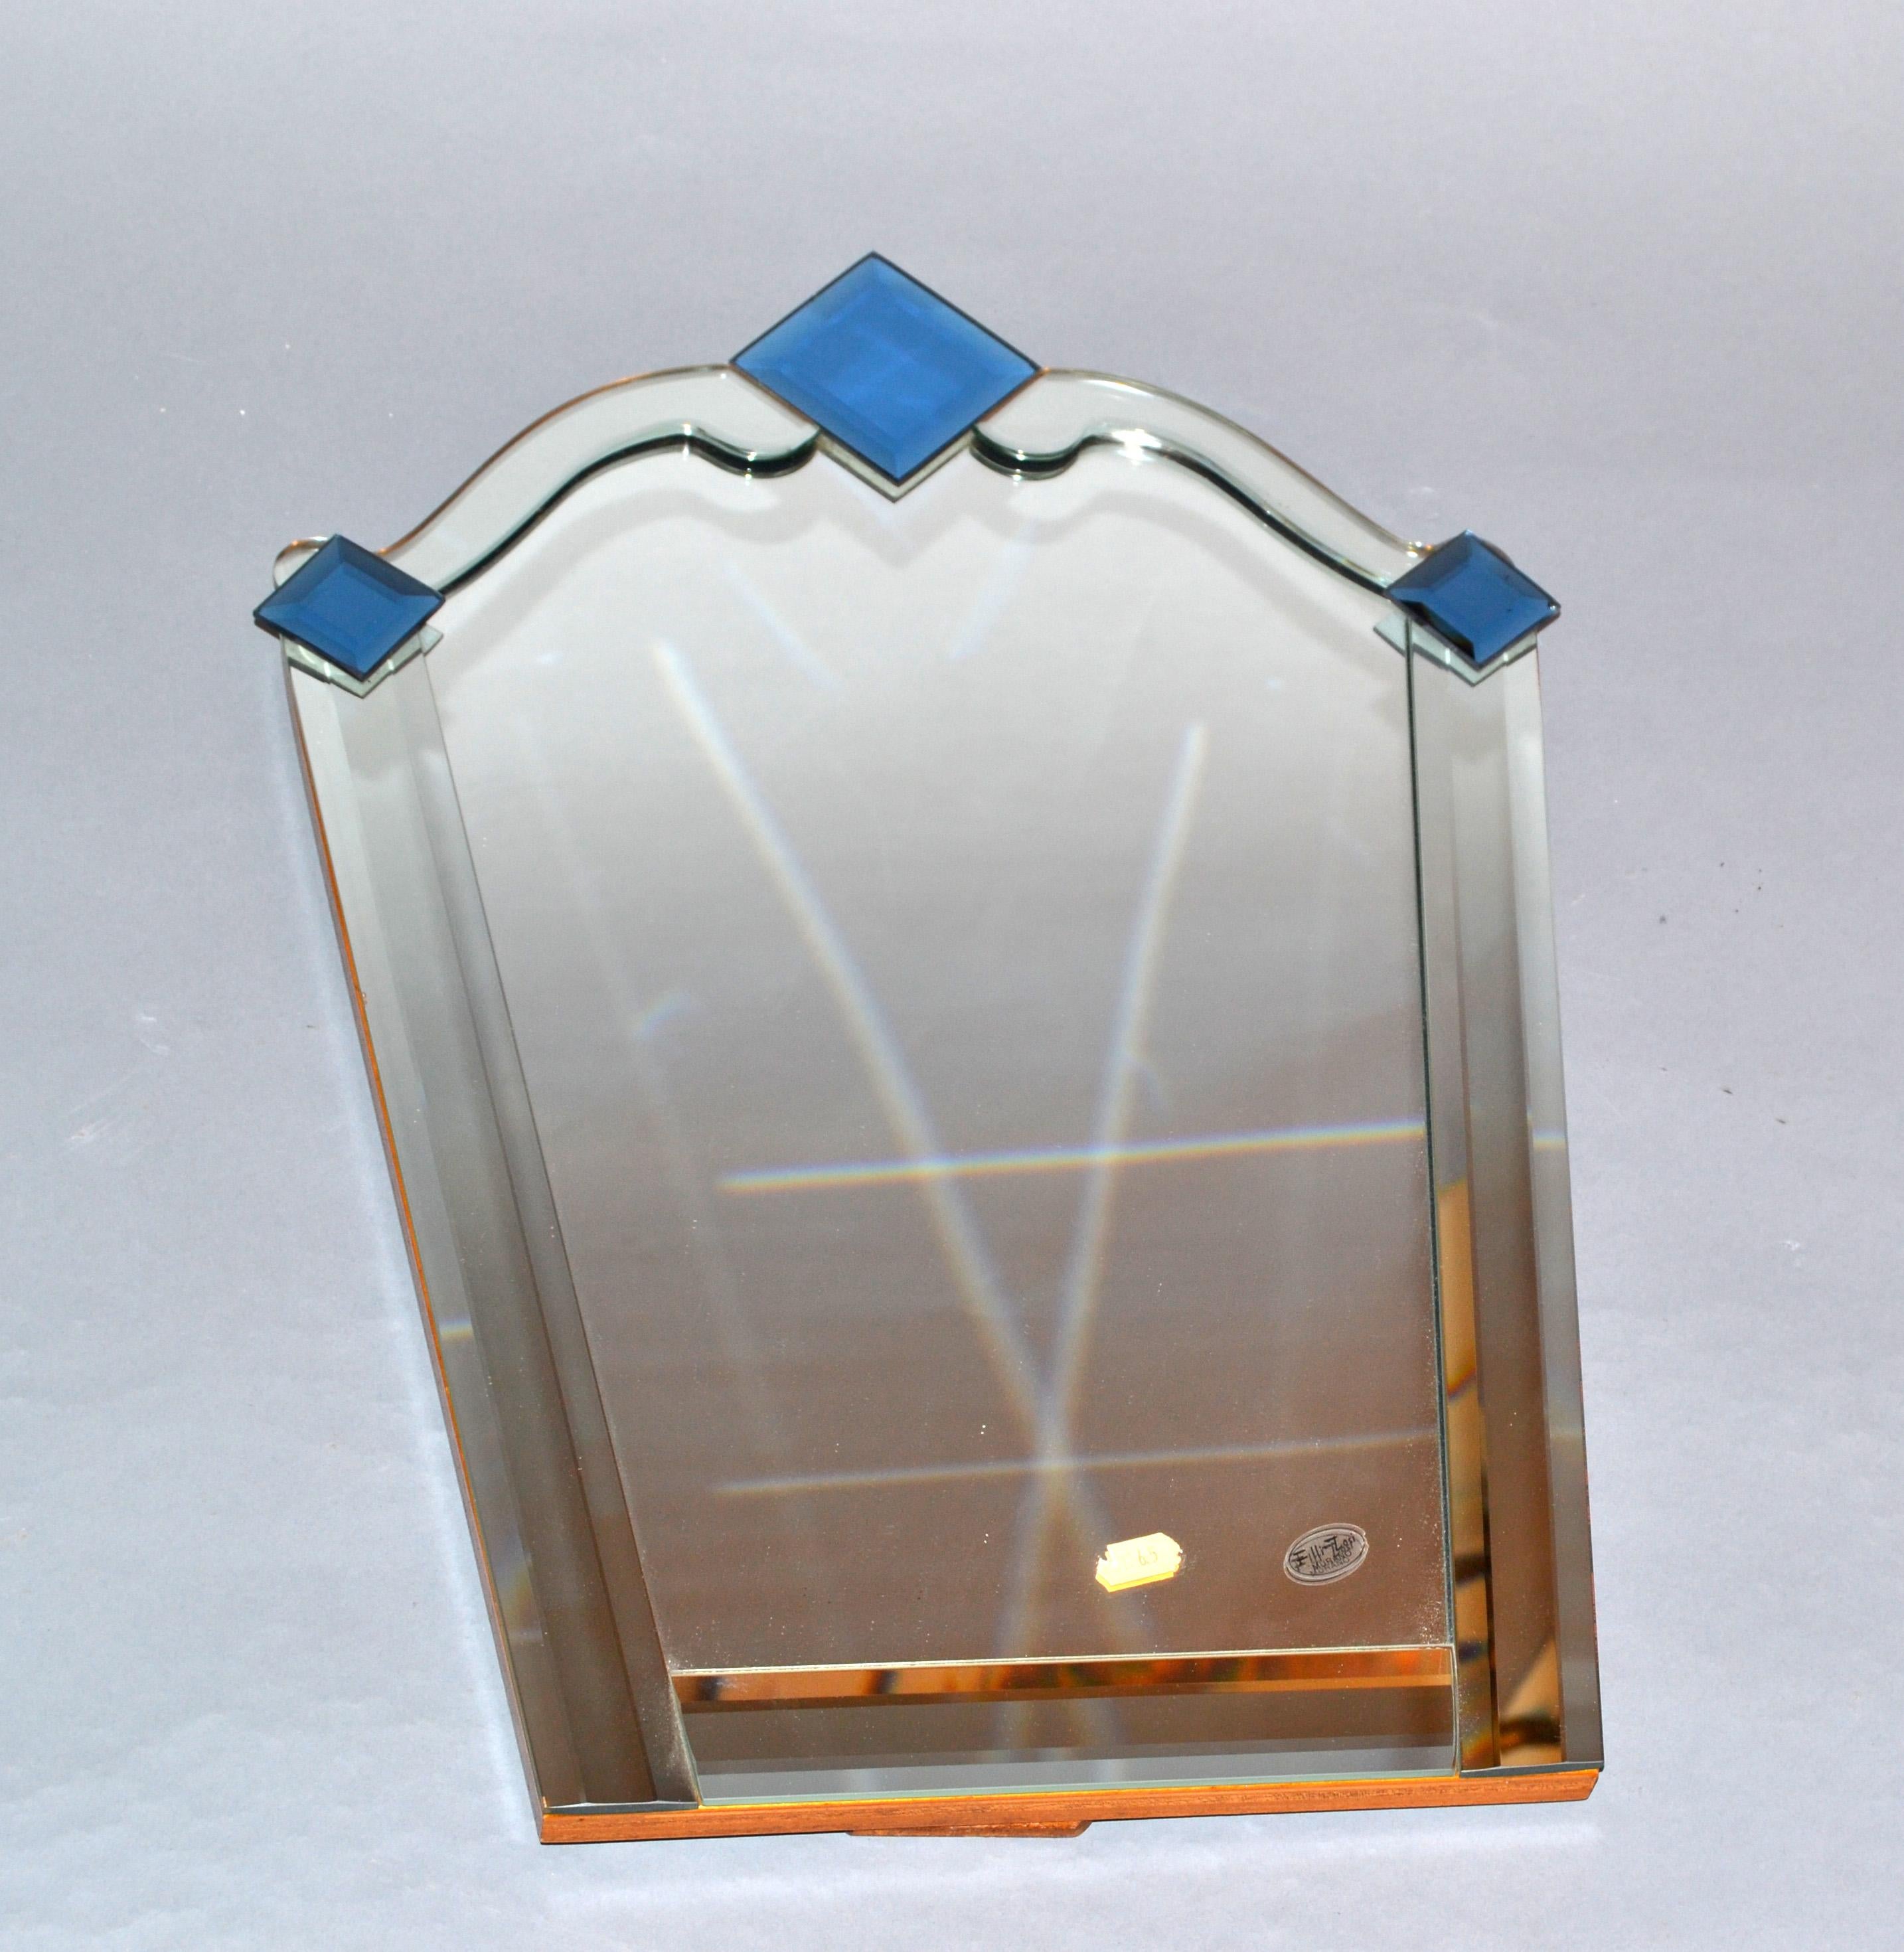 Graceful Fratelli Tosi Venetian glass vanity or table mirror with blue beveled Murano glass elements.
Made in Italy, makers mark on the mirror.
The reverse is made out of solid wood.